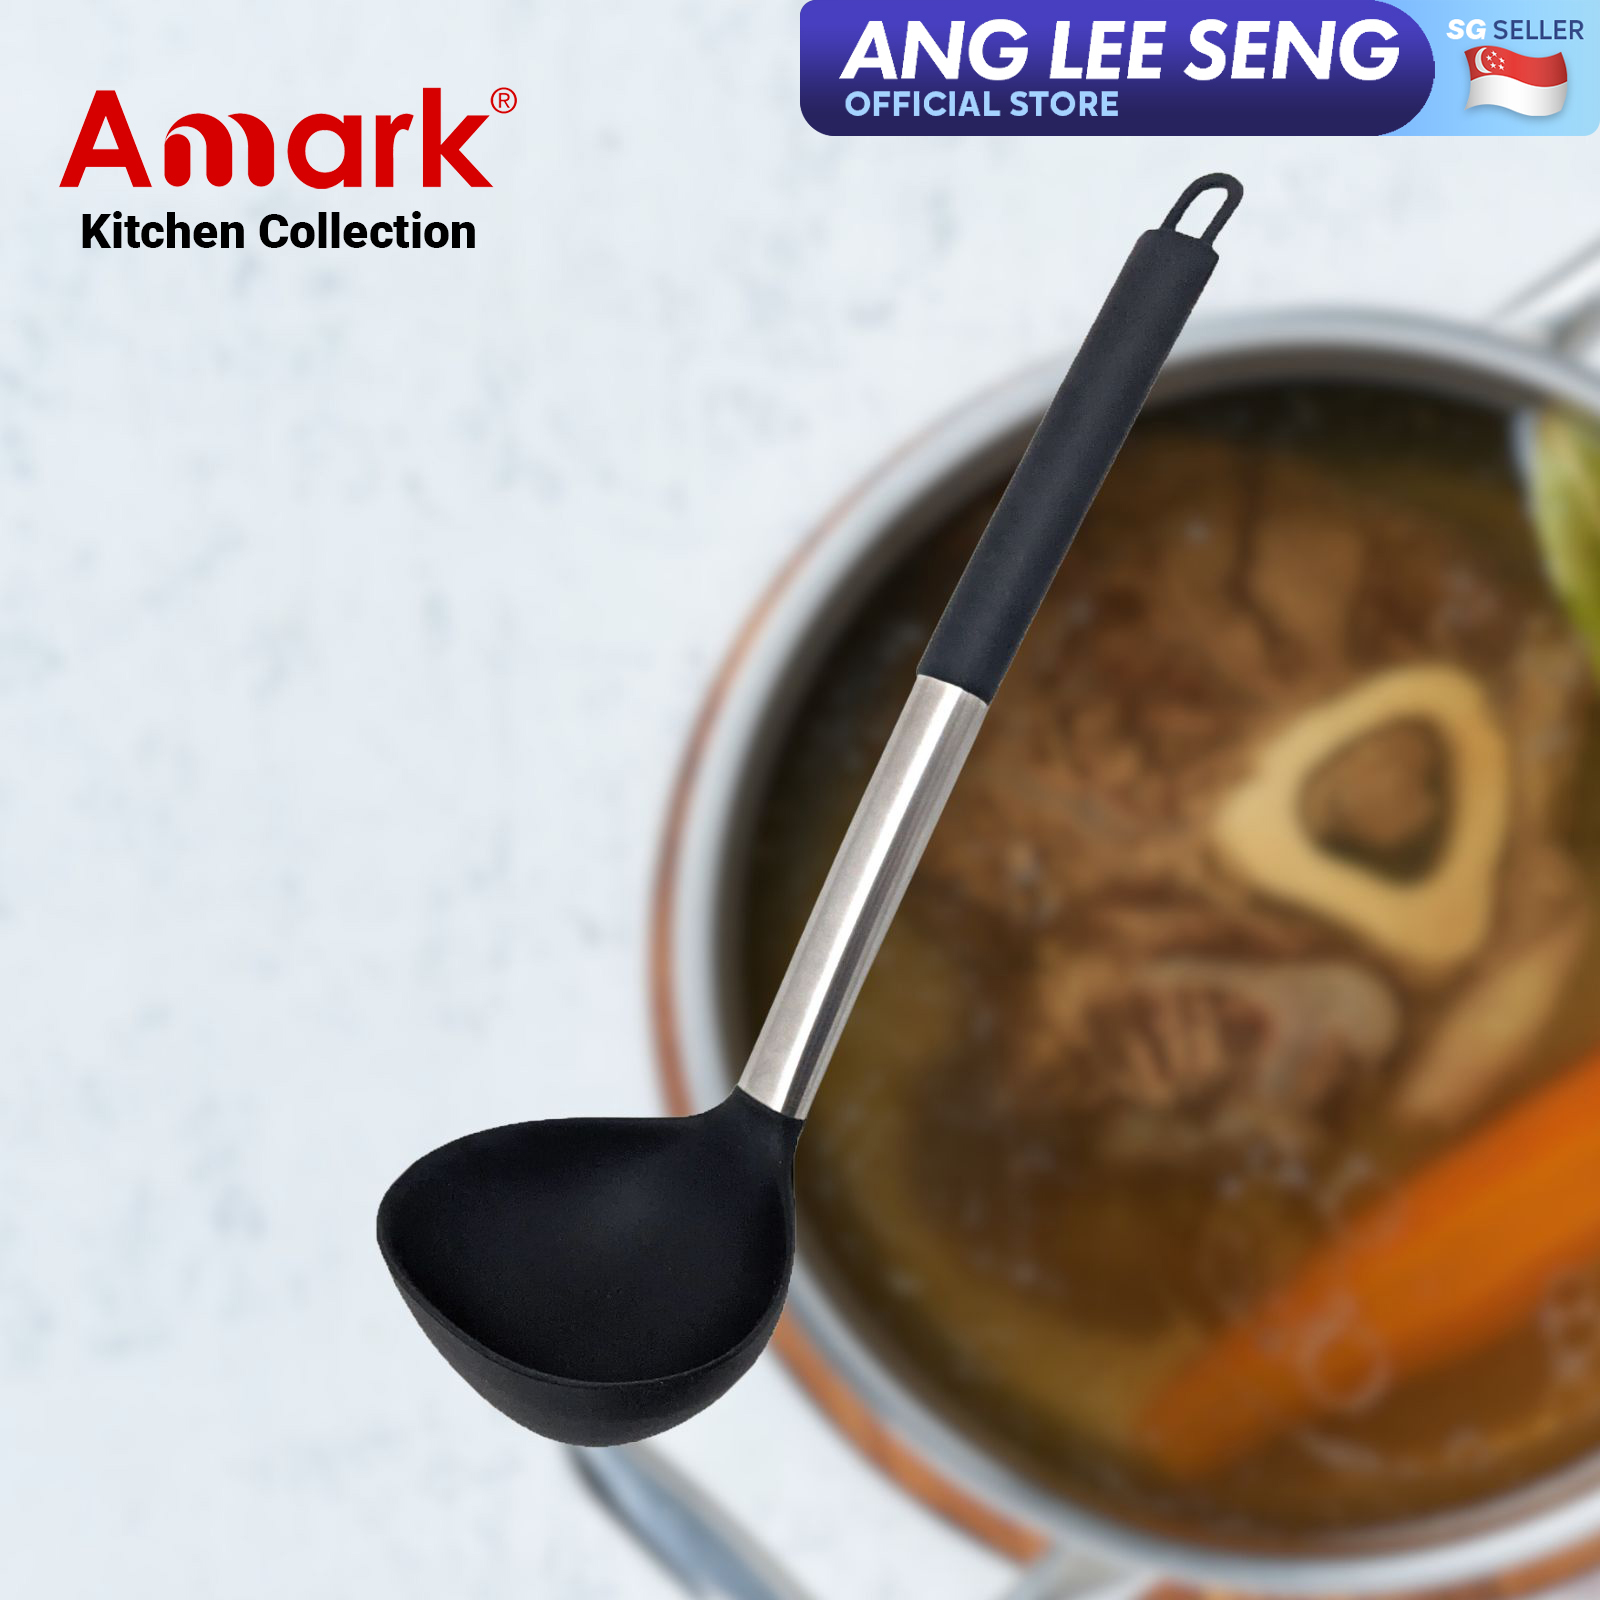 Amark Kitchen Collection Silicone & Stainless Steel Ladle - Scratch & High Heat Resistant